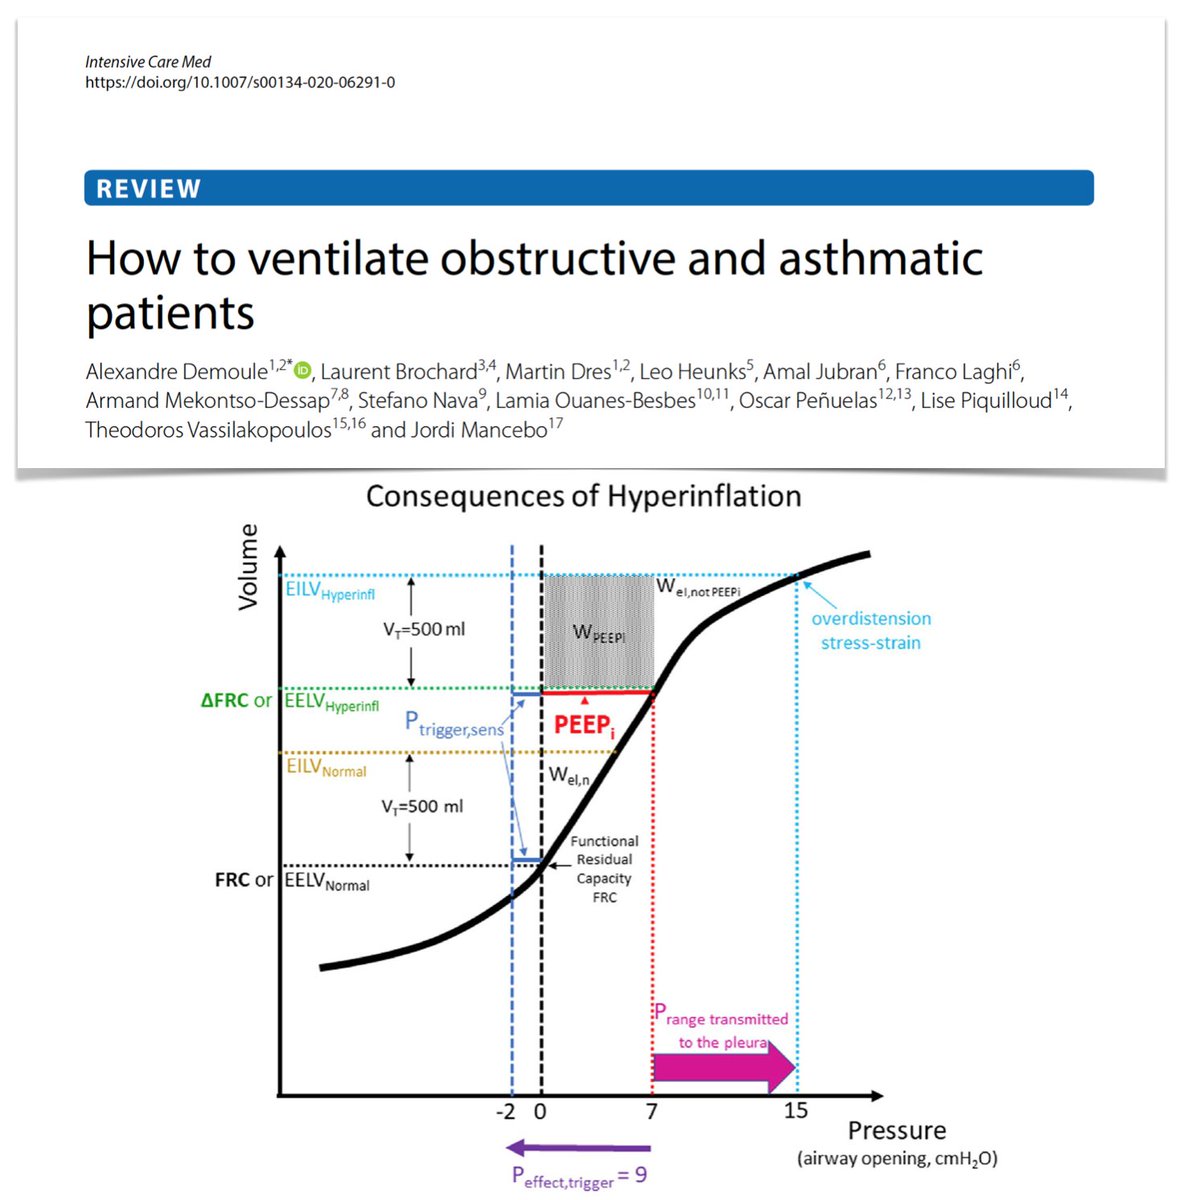 Ventilation in #COPD & asthma ➡️ respiratory mechanics/gas exchange ➡️ heart–lung interactions ➡️ HFNO & NIV ➡️ managing invasive MV from intubation to (early) weaning limiting hyperinflation ➡️ long‑term outcome & role of tracheostomy ➡️ future strategies bit.ly/3lrmGYk